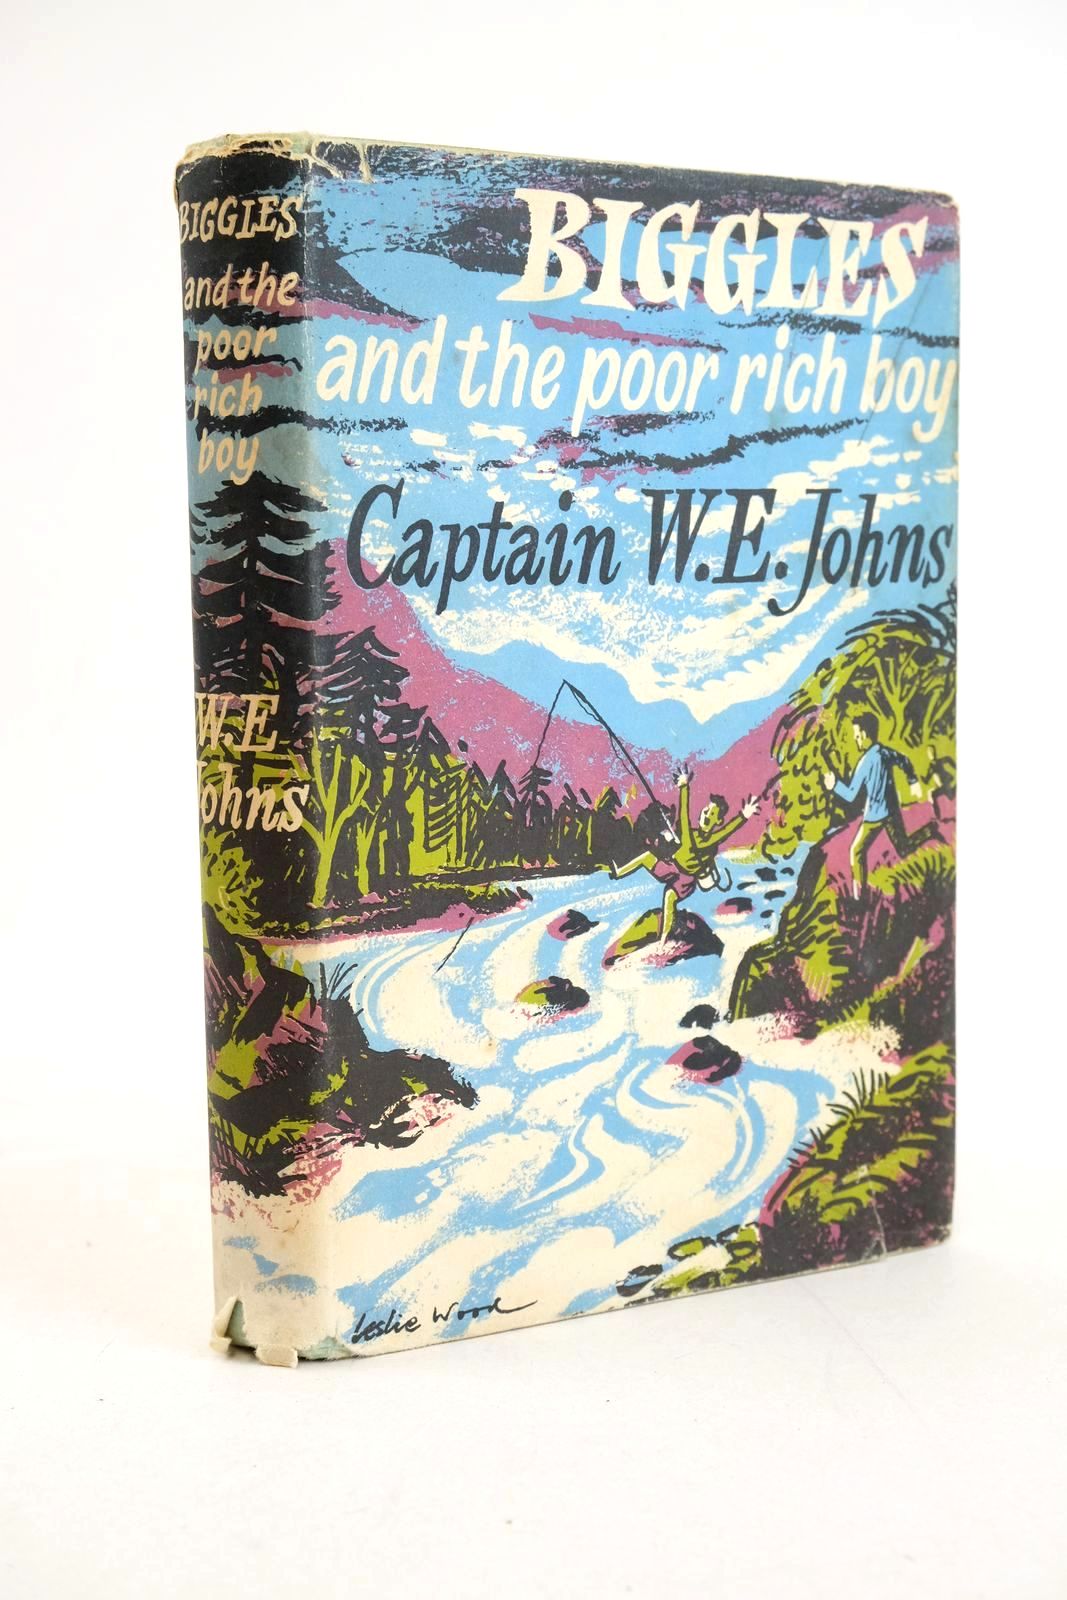 Photo of BIGGLES AND THE POOR RICH BOY written by Johns, W.E. illustrated by Stead, Leslie published by The Children's Book Club (STOCK CODE: 1327433)  for sale by Stella & Rose's Books